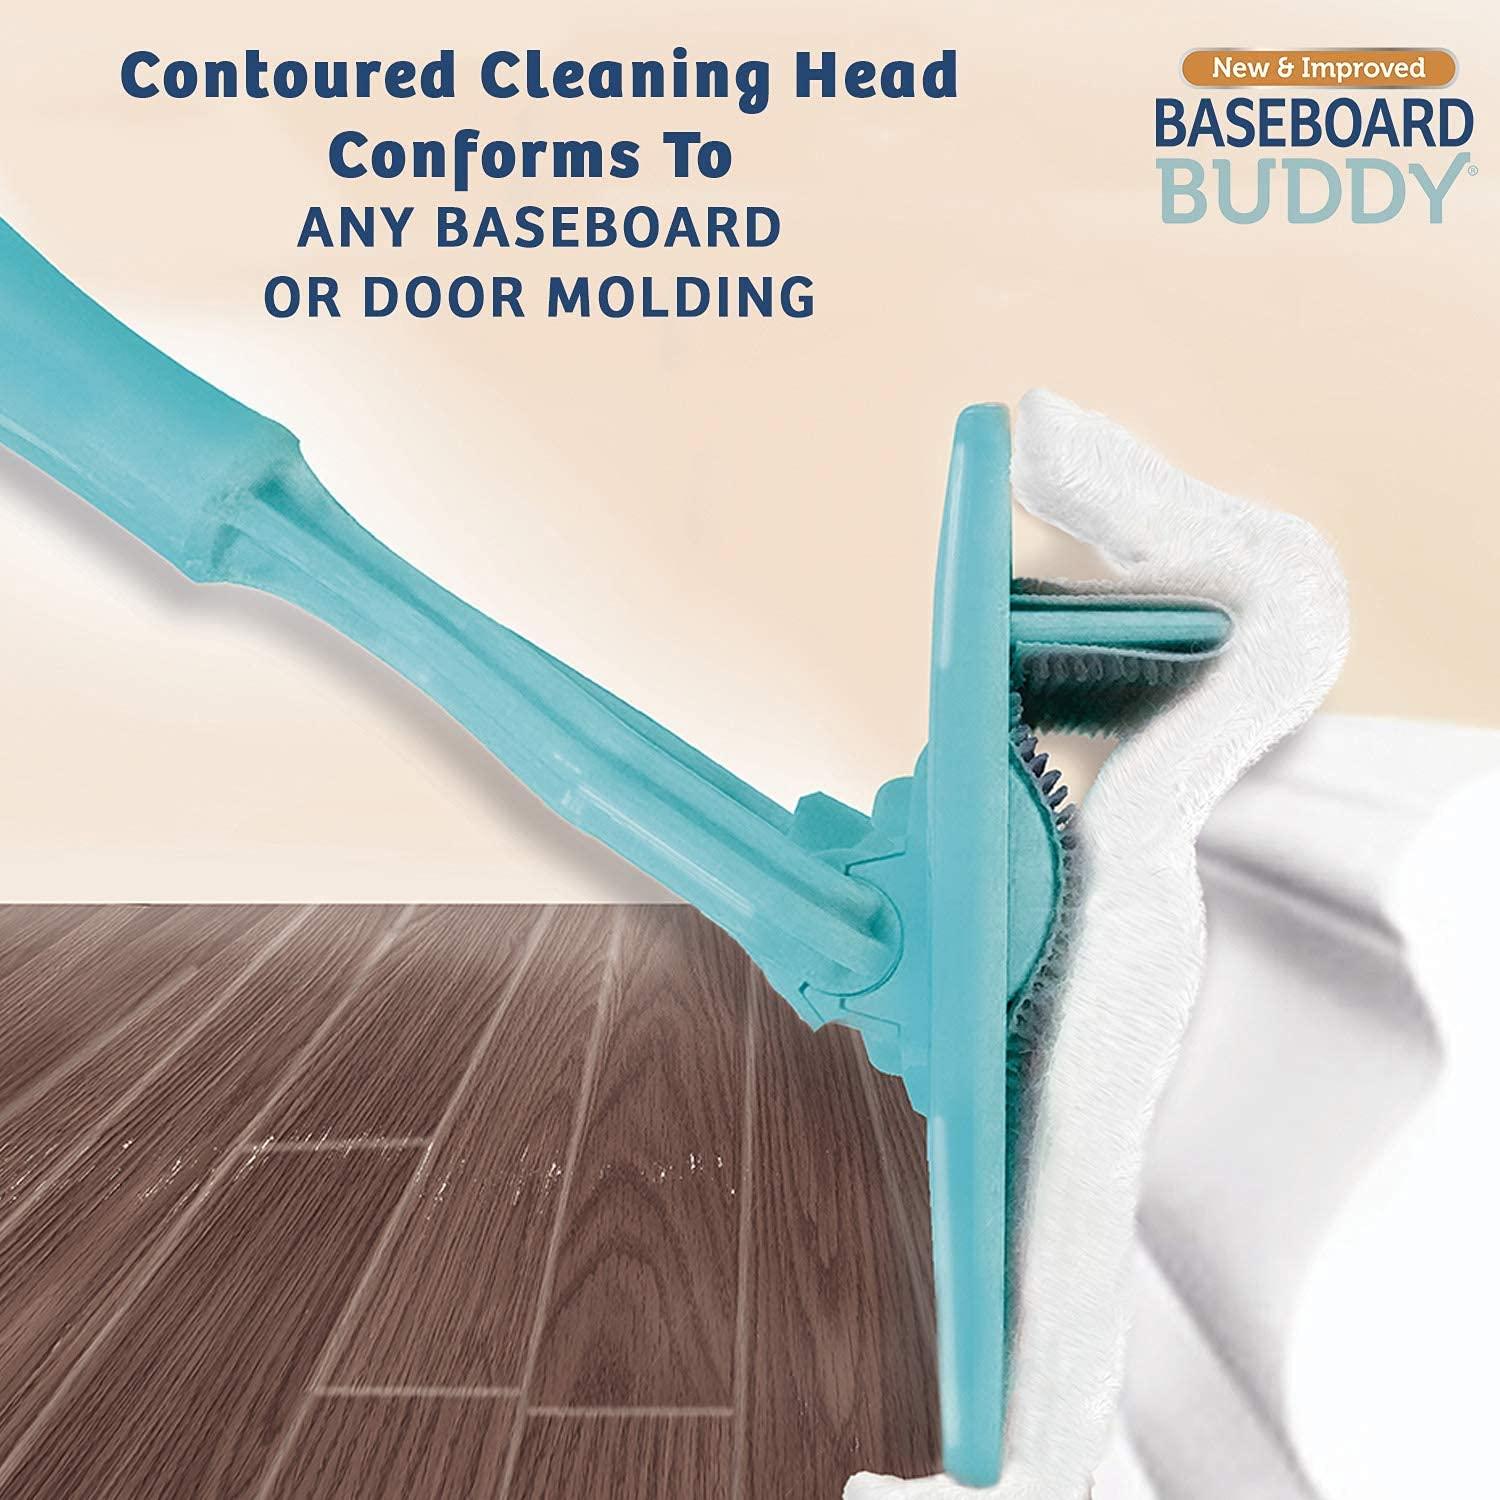 BASEBOARD BUDDY Baseboard & Molding Cleaning Tool As Seen On TV 3 Pads  Included